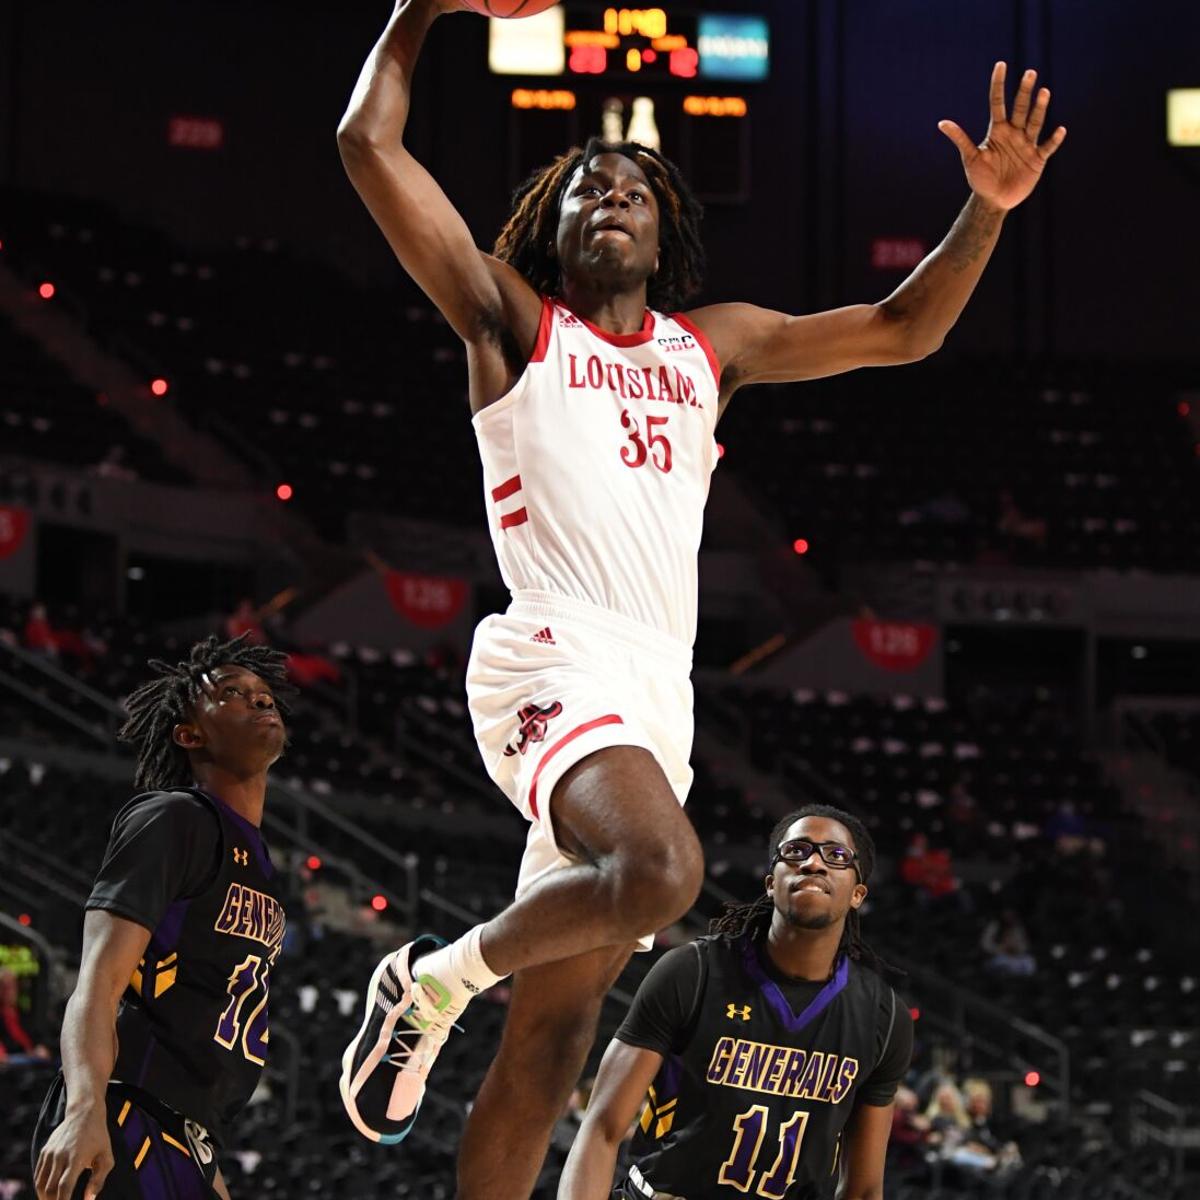 UL-Lafayette women look to rebound from home loss